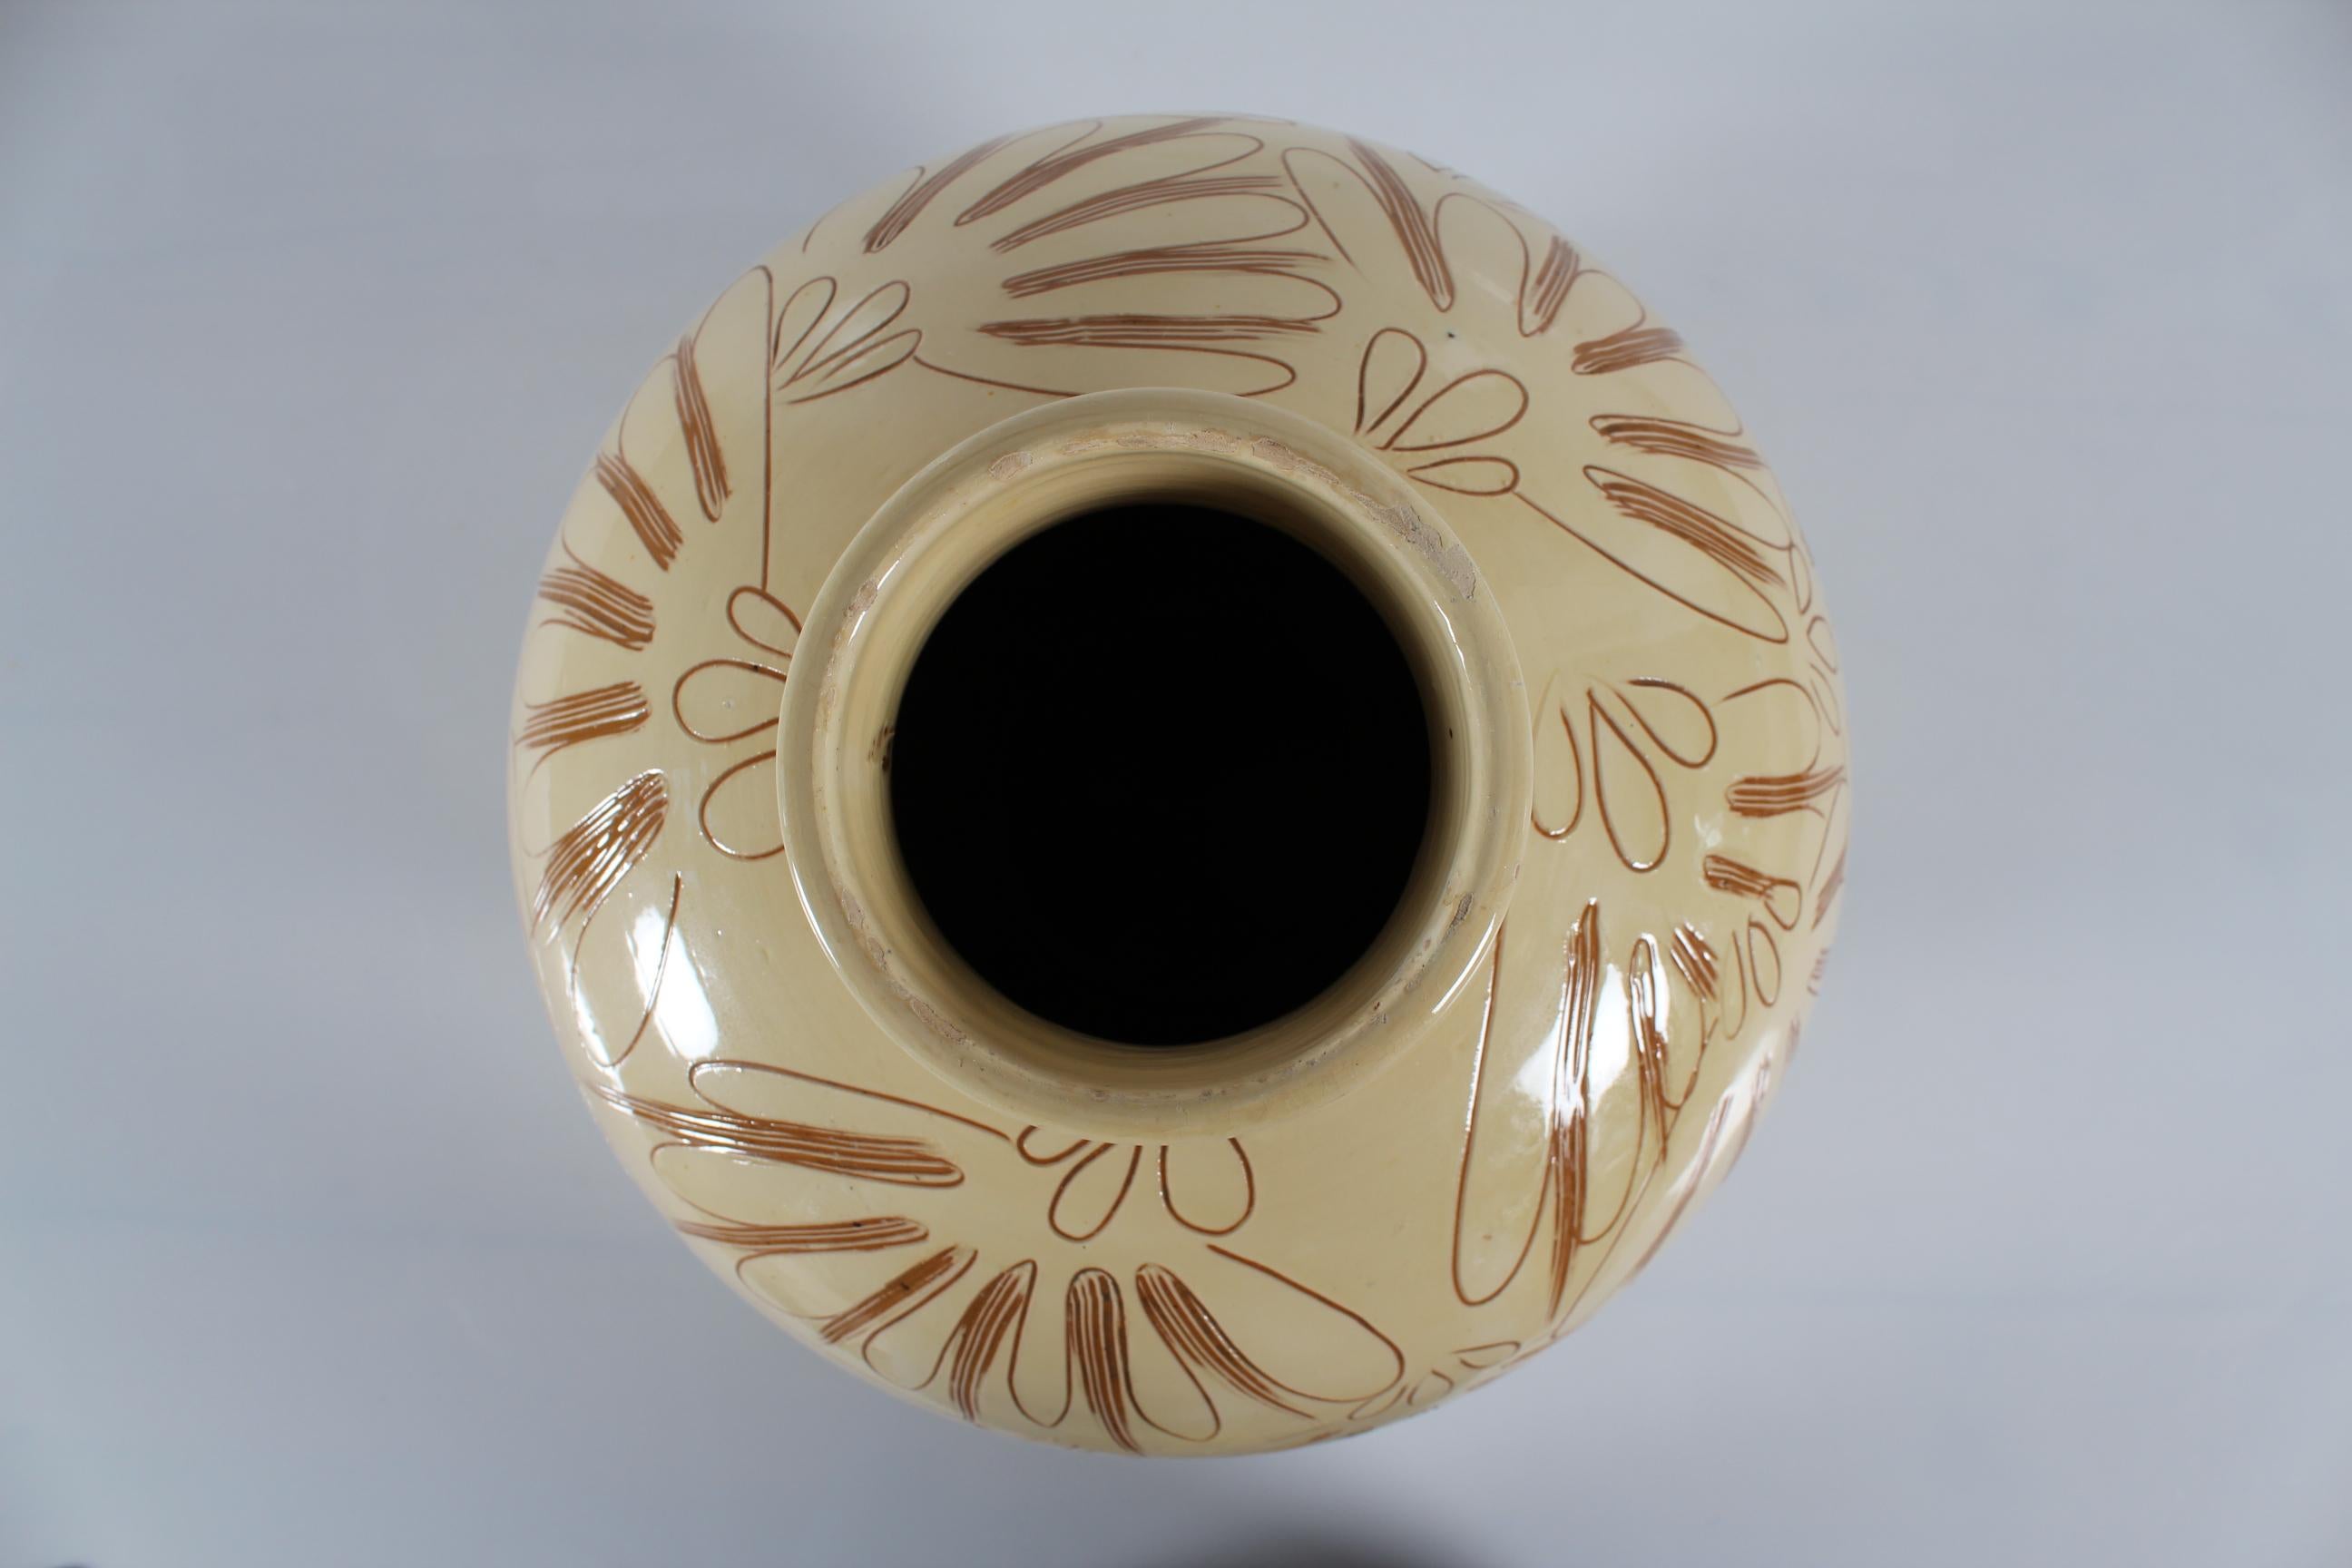 Large Herman A Kähler Sgraffito Floor Vase with Cream Yellow Glaze 1940-50s For Sale 2